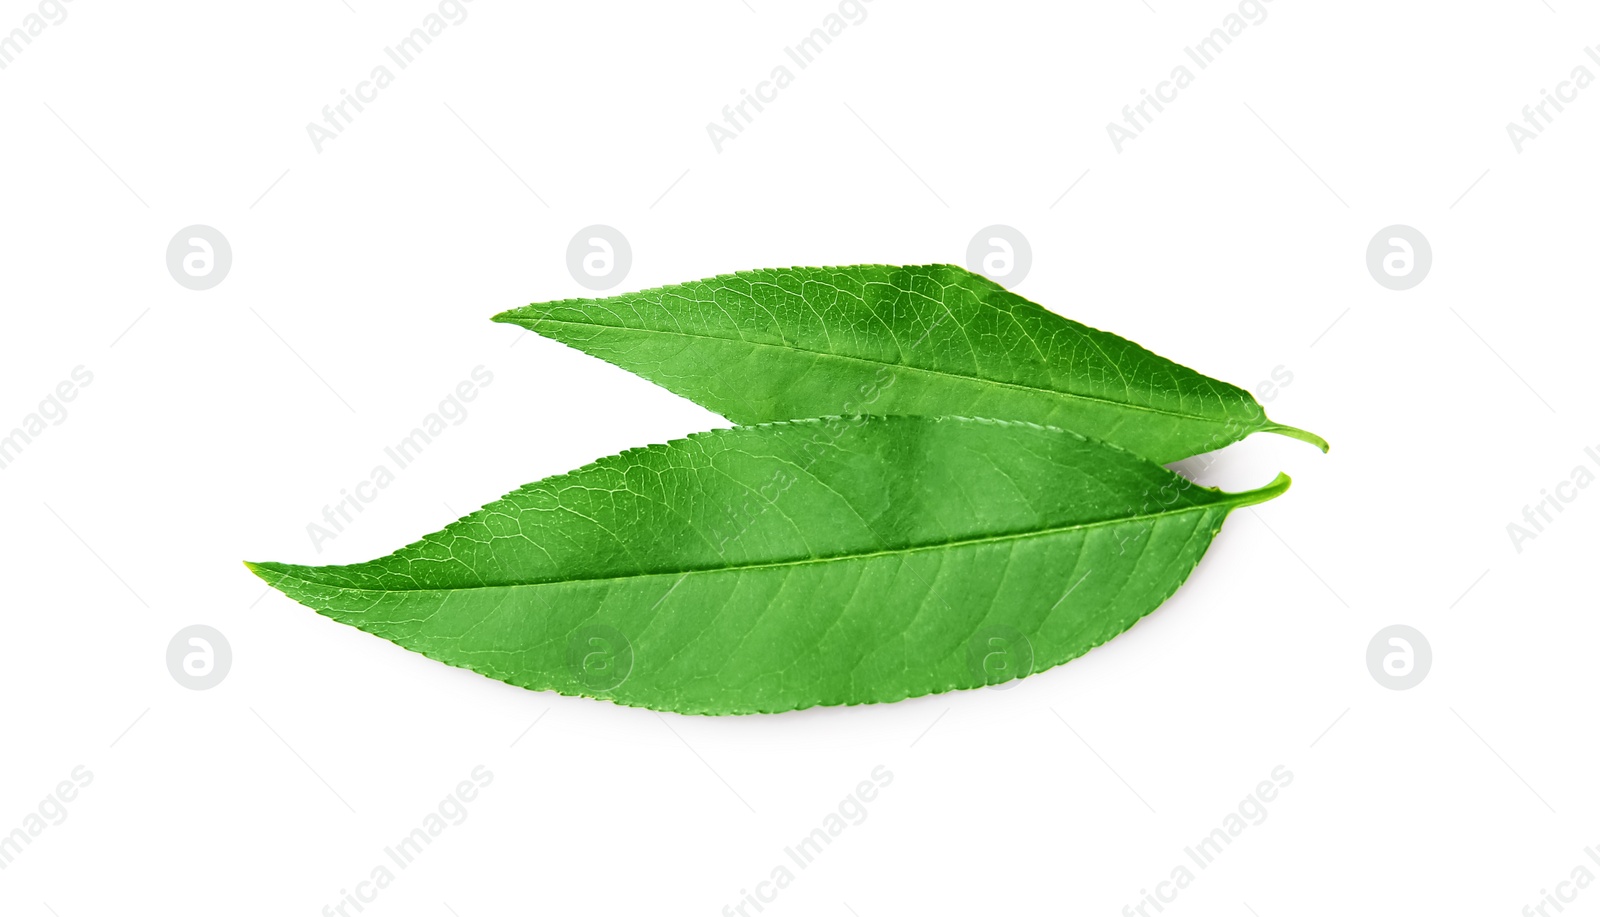 Photo of Two green peach tree leaves isolated on white